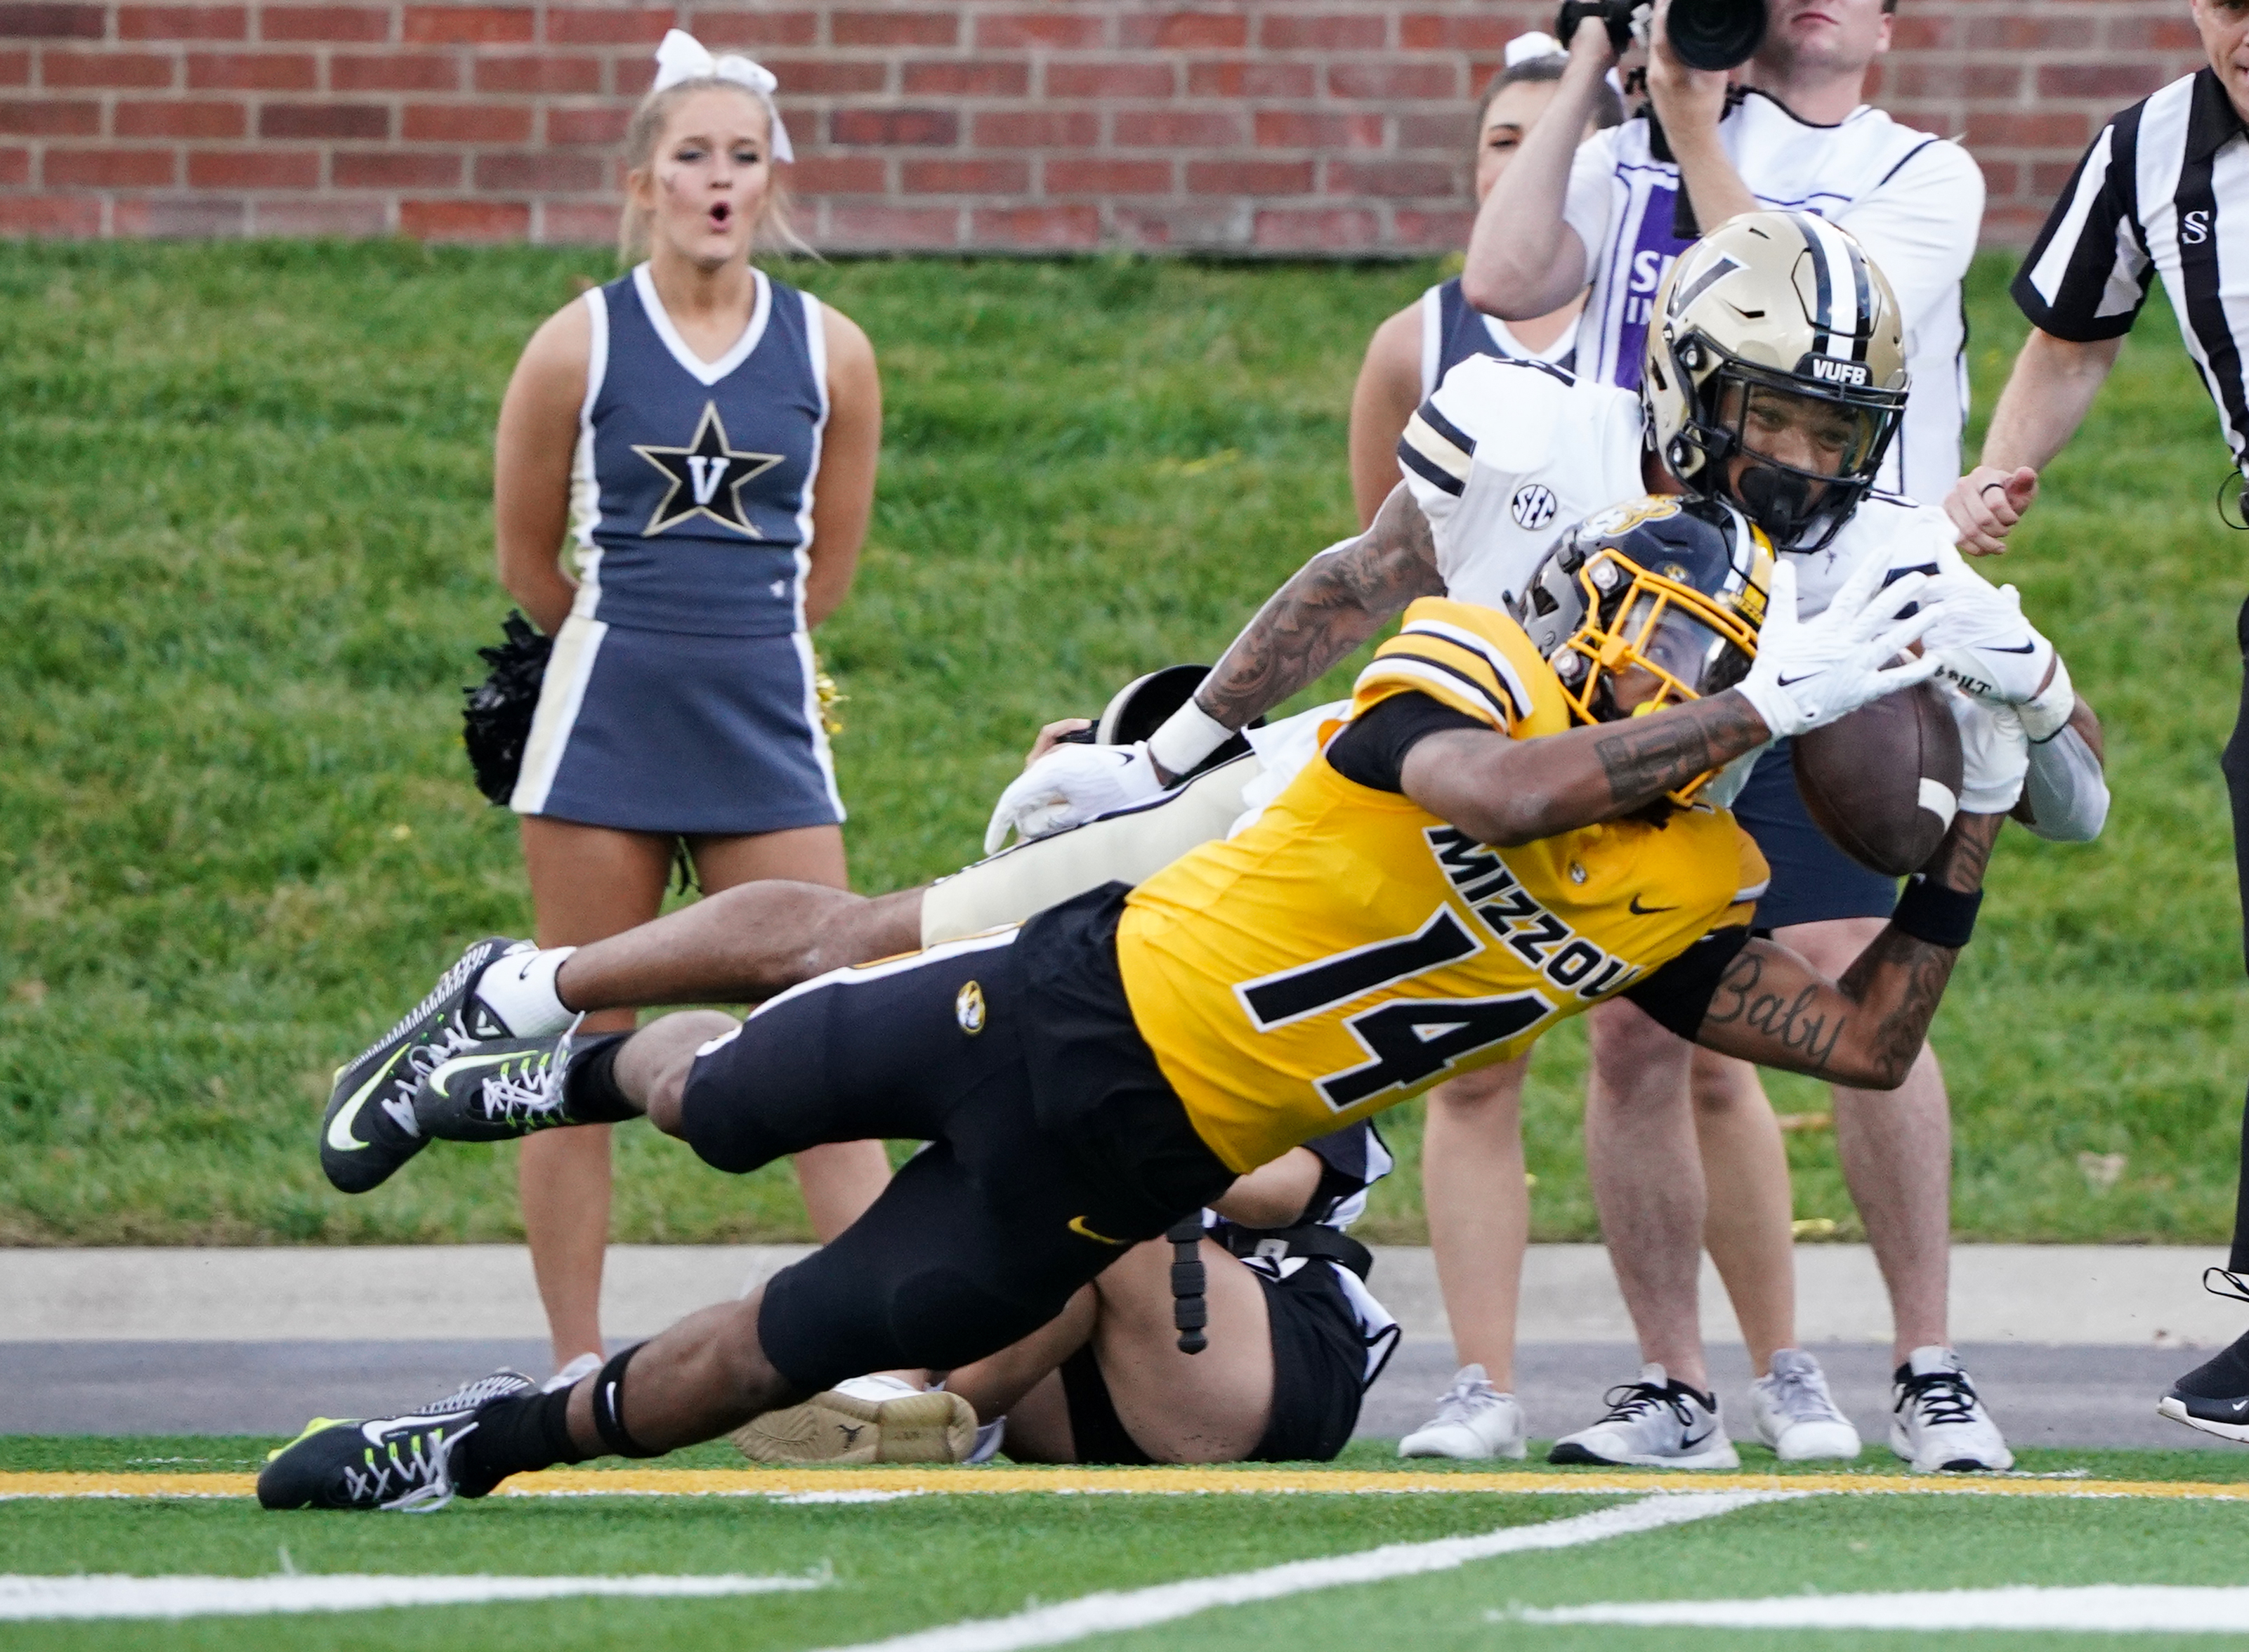 Oct 22, 2022; Columbia, Missouri, USA; Missouri Tigers defensive back Kris Abrams-Draine (14) breaks up a pass intended for Vanderbilt Commodores wide receiver Will Sheppard (14) during the first half of the game at Faurot Field at Memorial Stadium. Mandatory Credit: Denny Medley-USA TODAY Sports